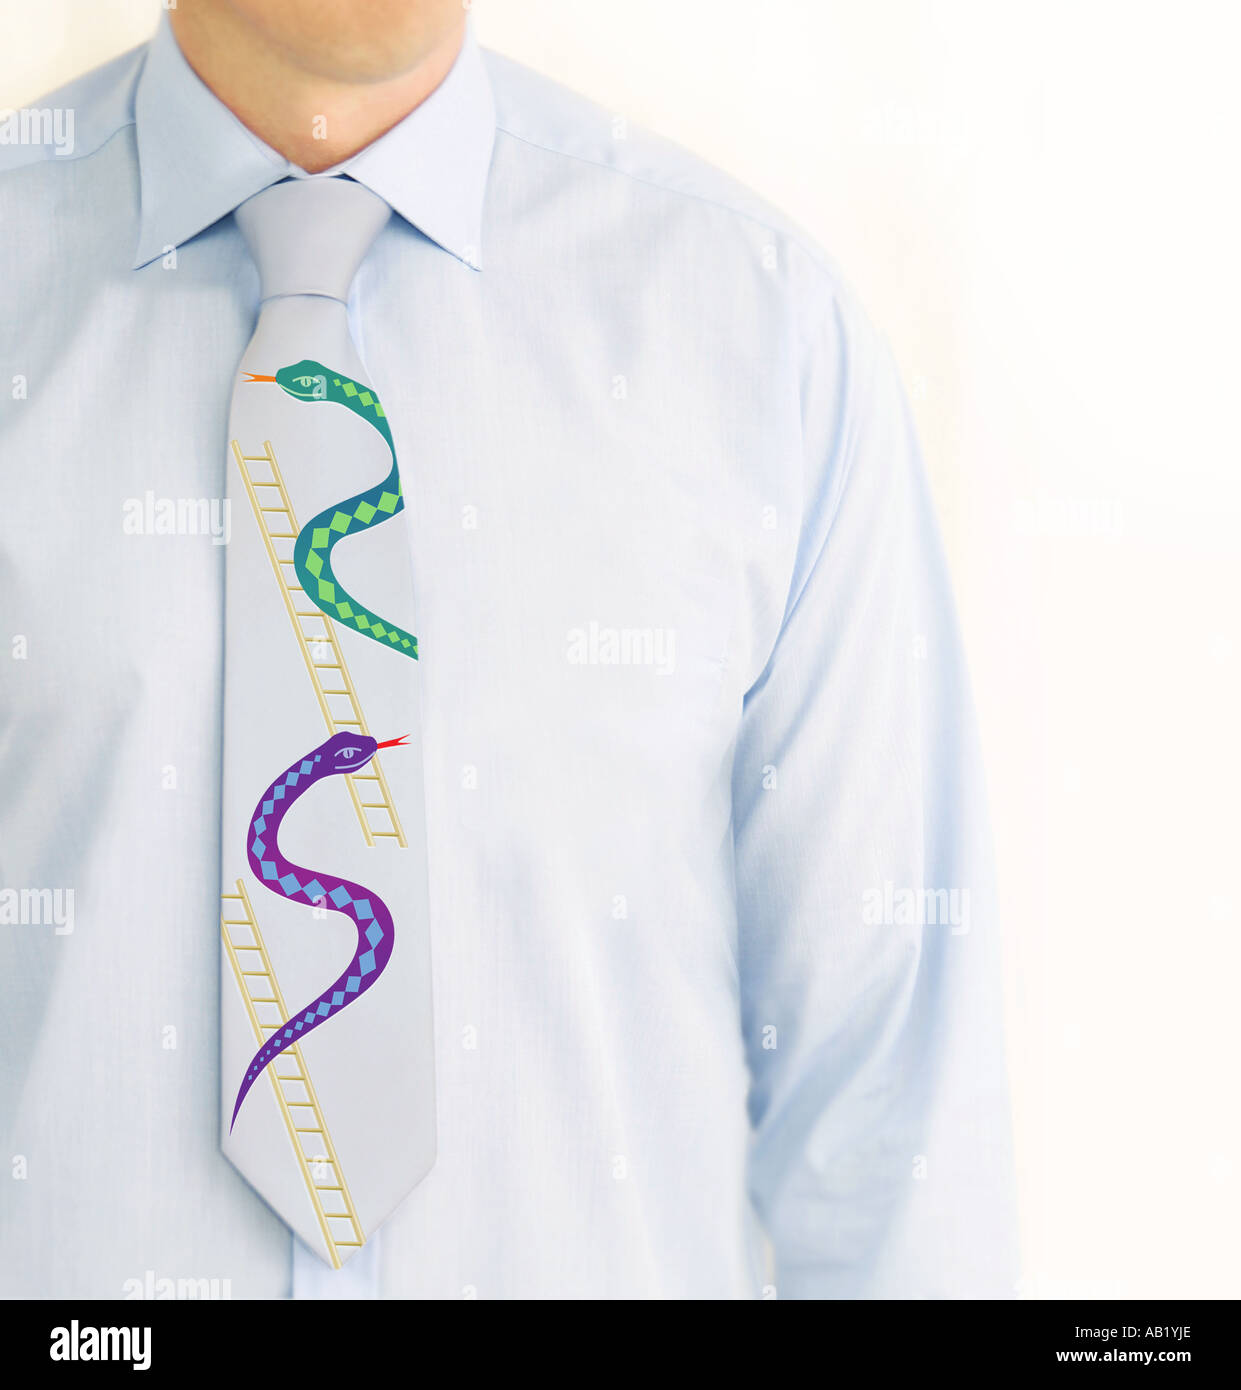 business man with snakes and ladders on his tie Stock Photo